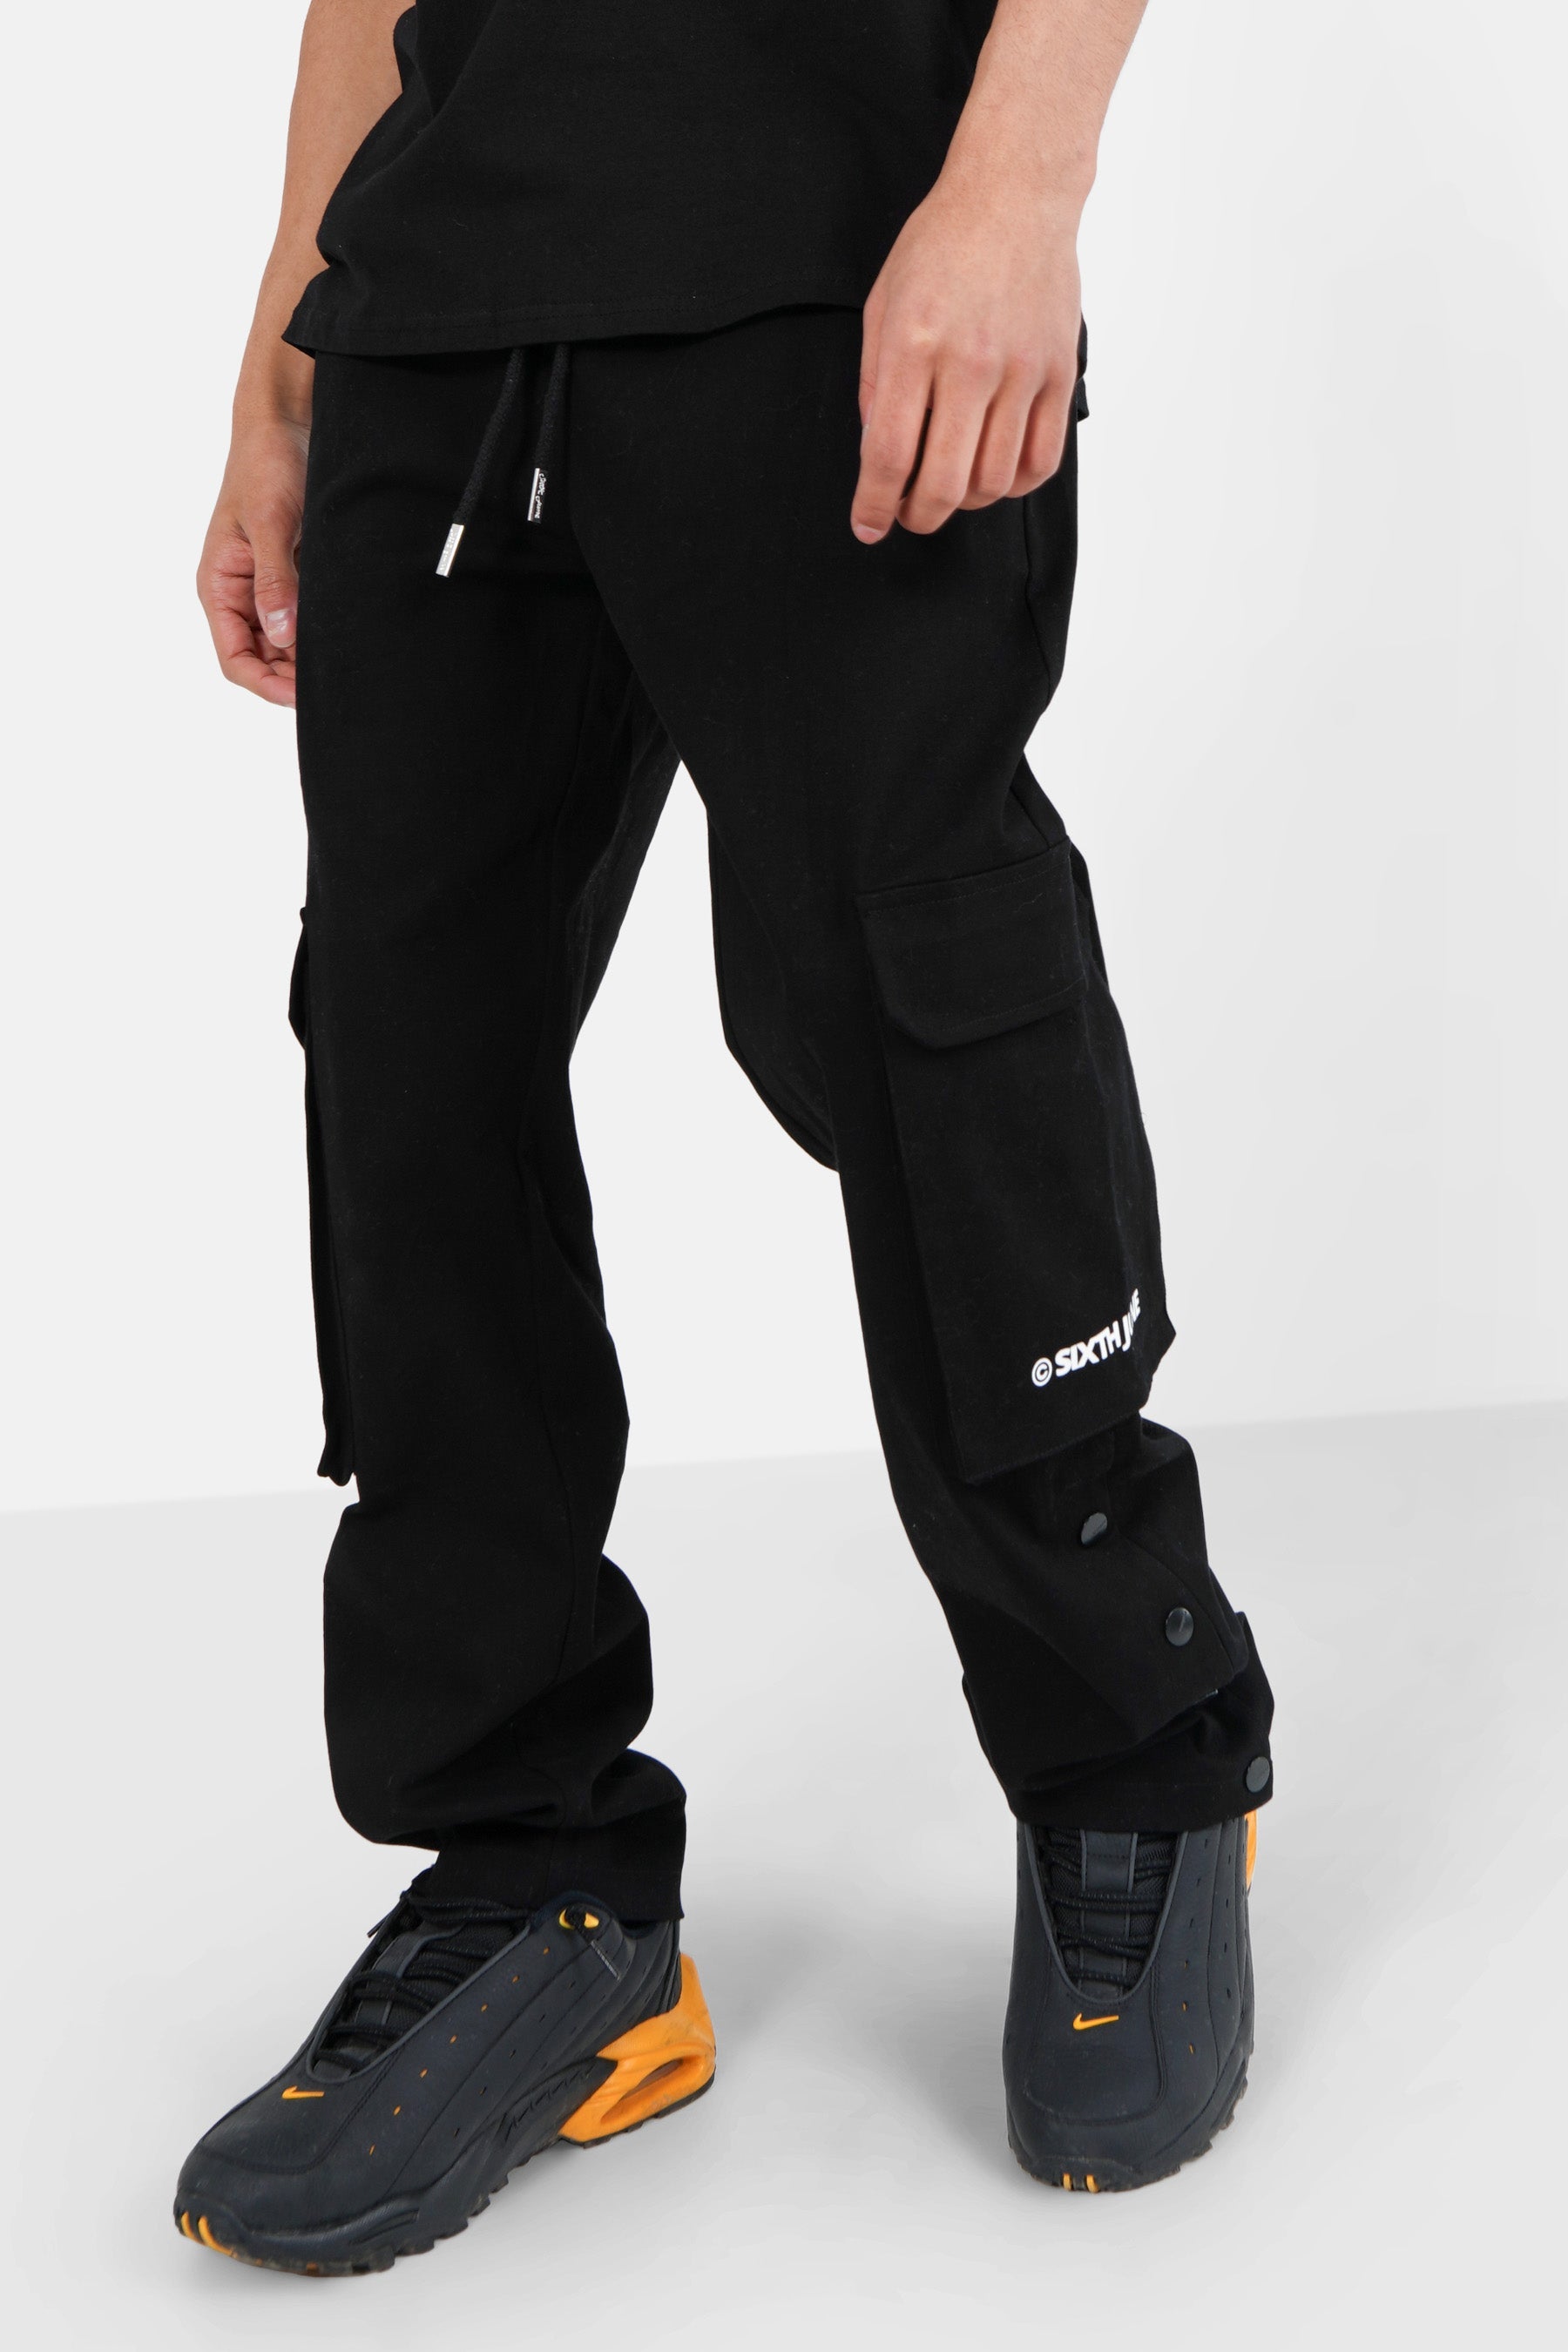 Trendize Fashion Stretchable Cargo Pant In Best Price